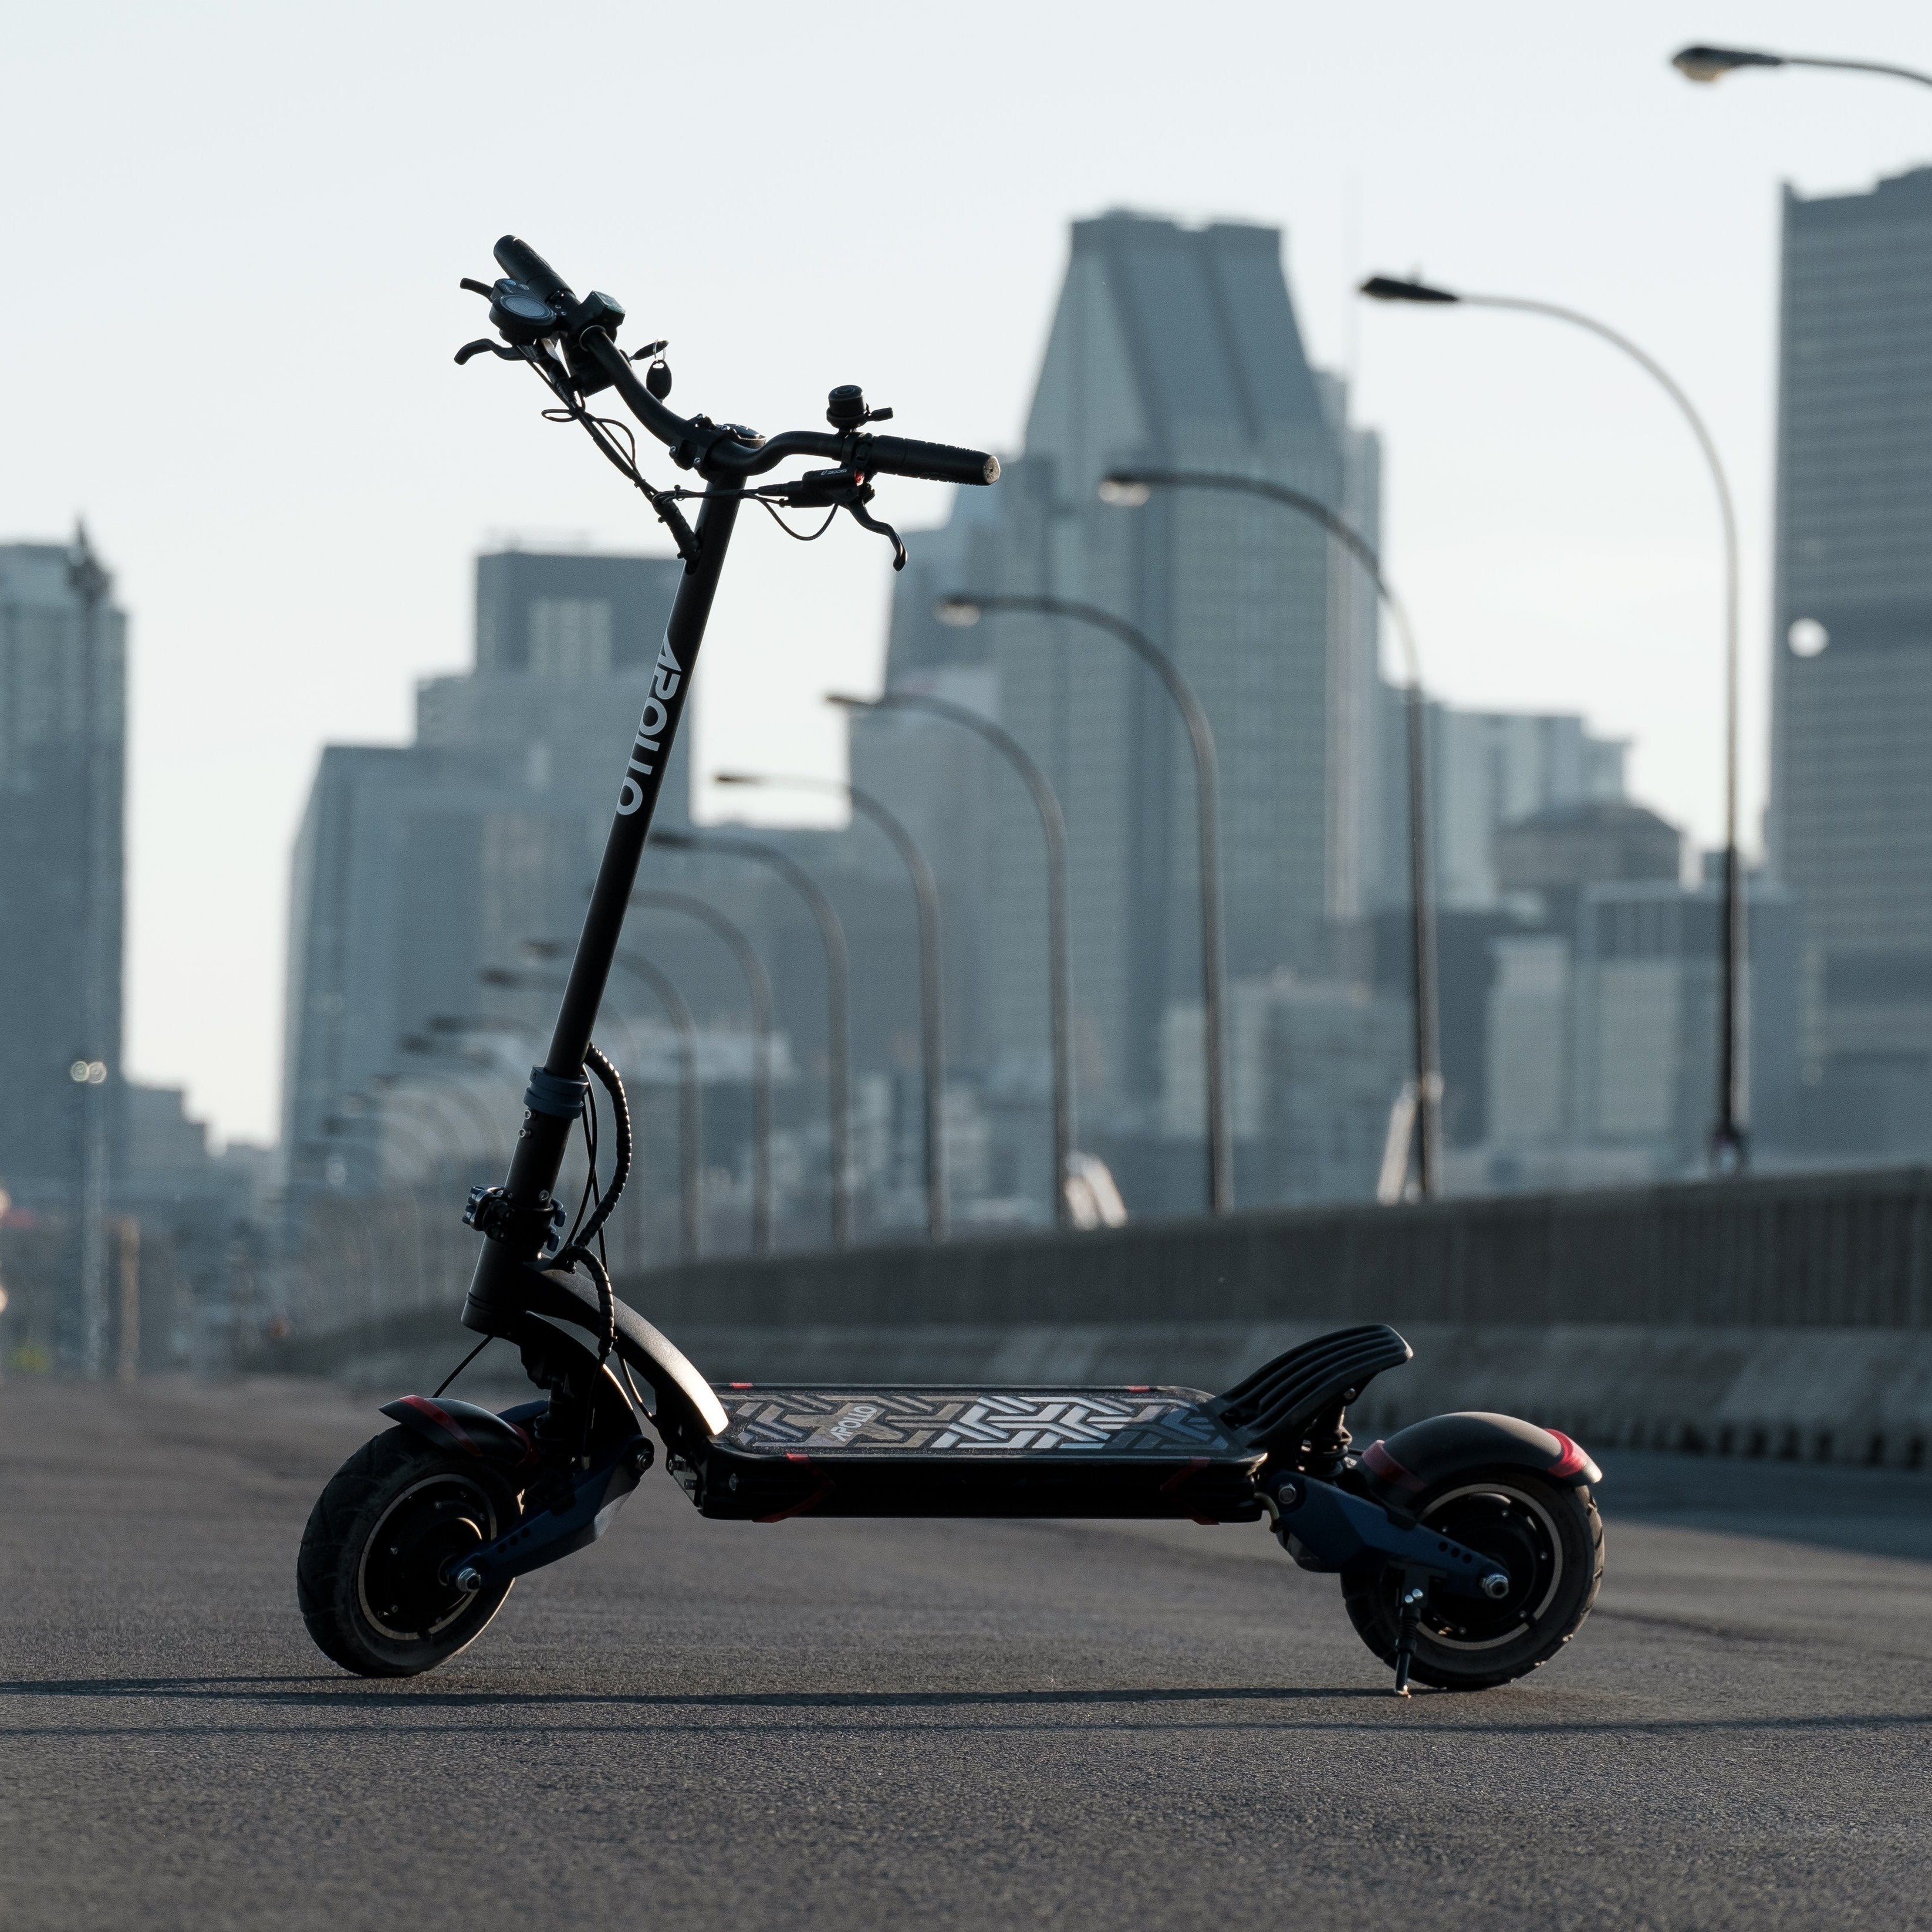 Apollo Pro The Most Powerful Electric Scooter Apollo Scooters